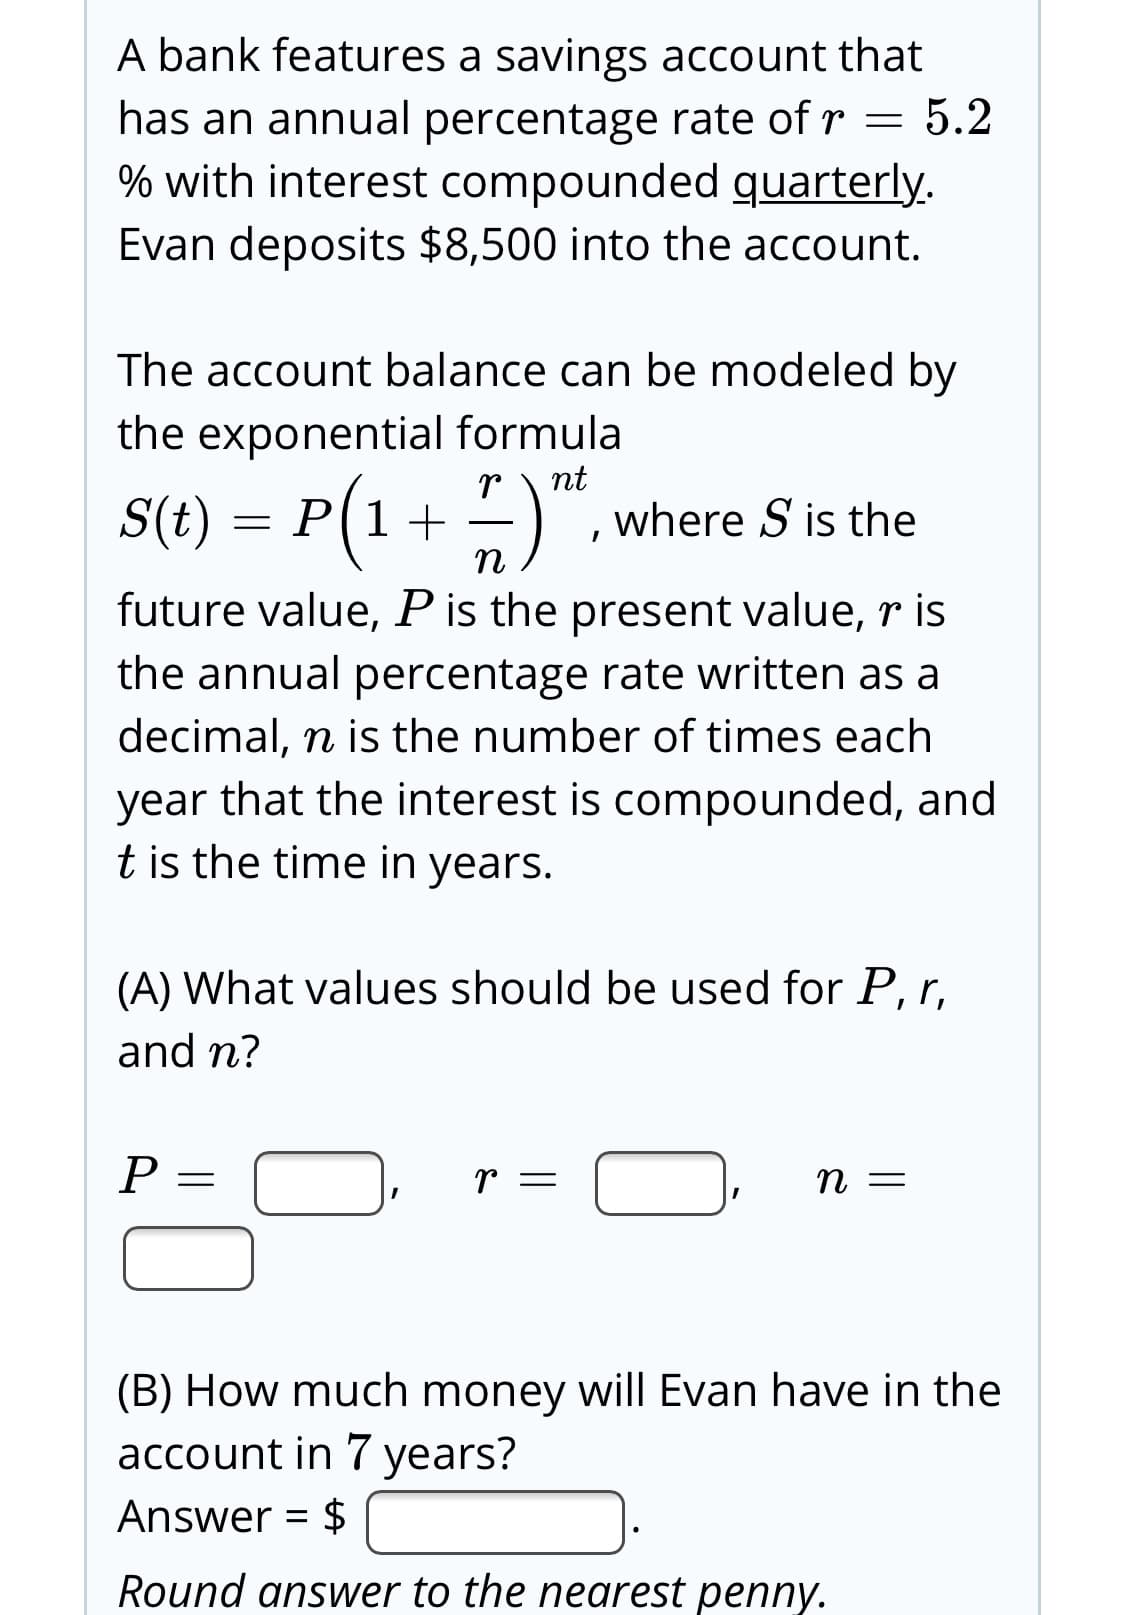 A bank features a savings account that
5.2
has an annual percentage rate of r =
% with interest compounded quarterly.
Evan deposits $8,500 into the account.
The account balance can be modeled by
the exponential formula
nt
S(t) = P(1+
where S is the
future value, Pis the present value, r is
the annual percentage rate written as a
decimal, n is the number of times each
year that the interest is compounded, and
t is the time in years.
(A) What values should be used for P, r,
and n?
P =
— и
(B) How much money will Evan have in the
account in 7 years?
Answer = $
Round answer to the nearest penny.
